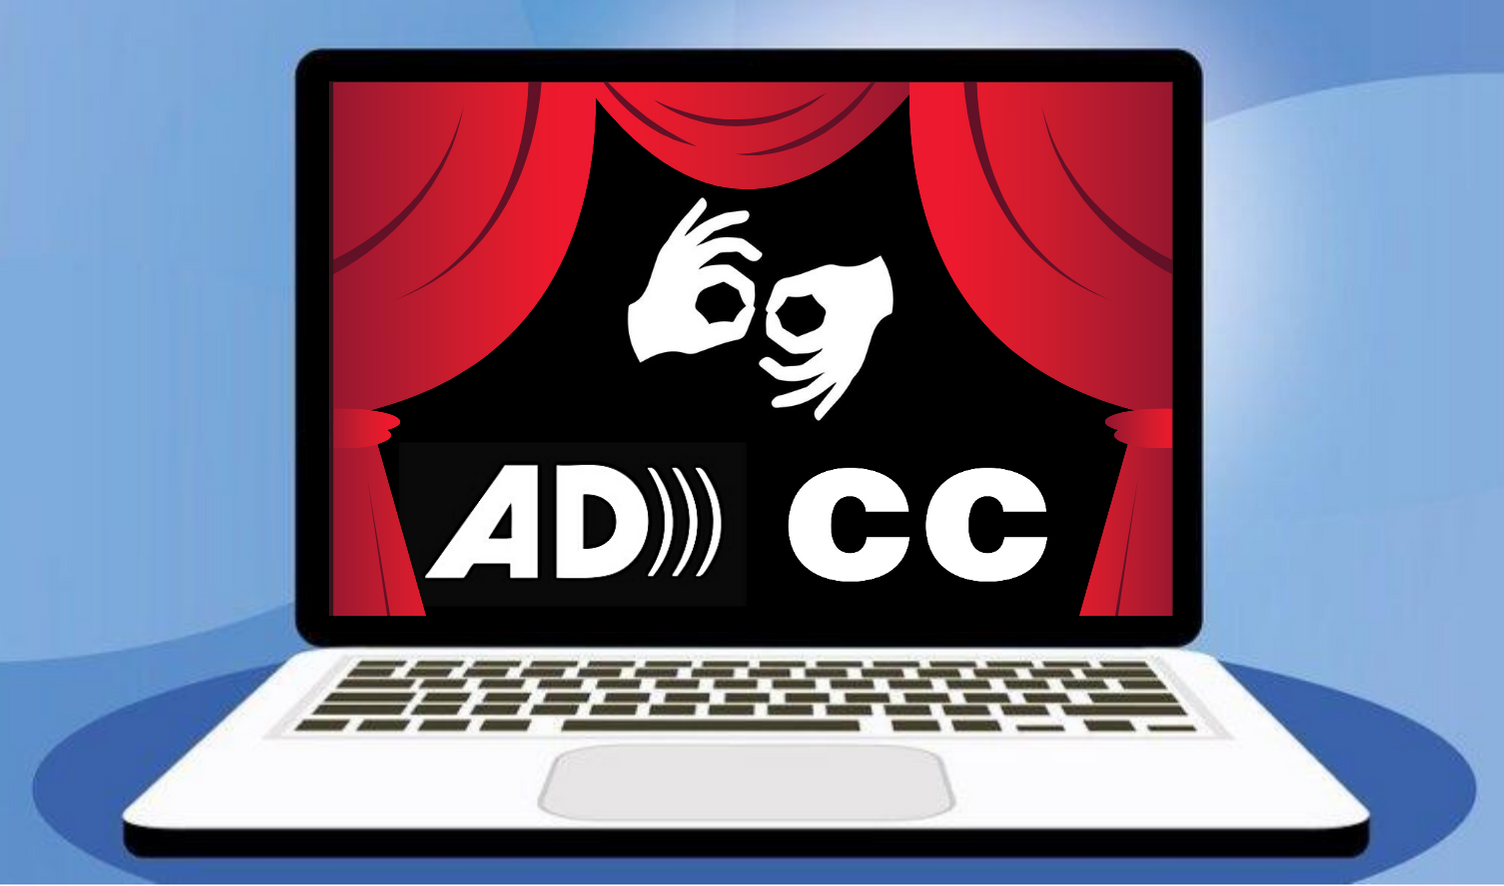 An illustration of an open laptop computer against a blue background. on the computer screen is an image of 3 accessibility icons surrounded by red curtains.